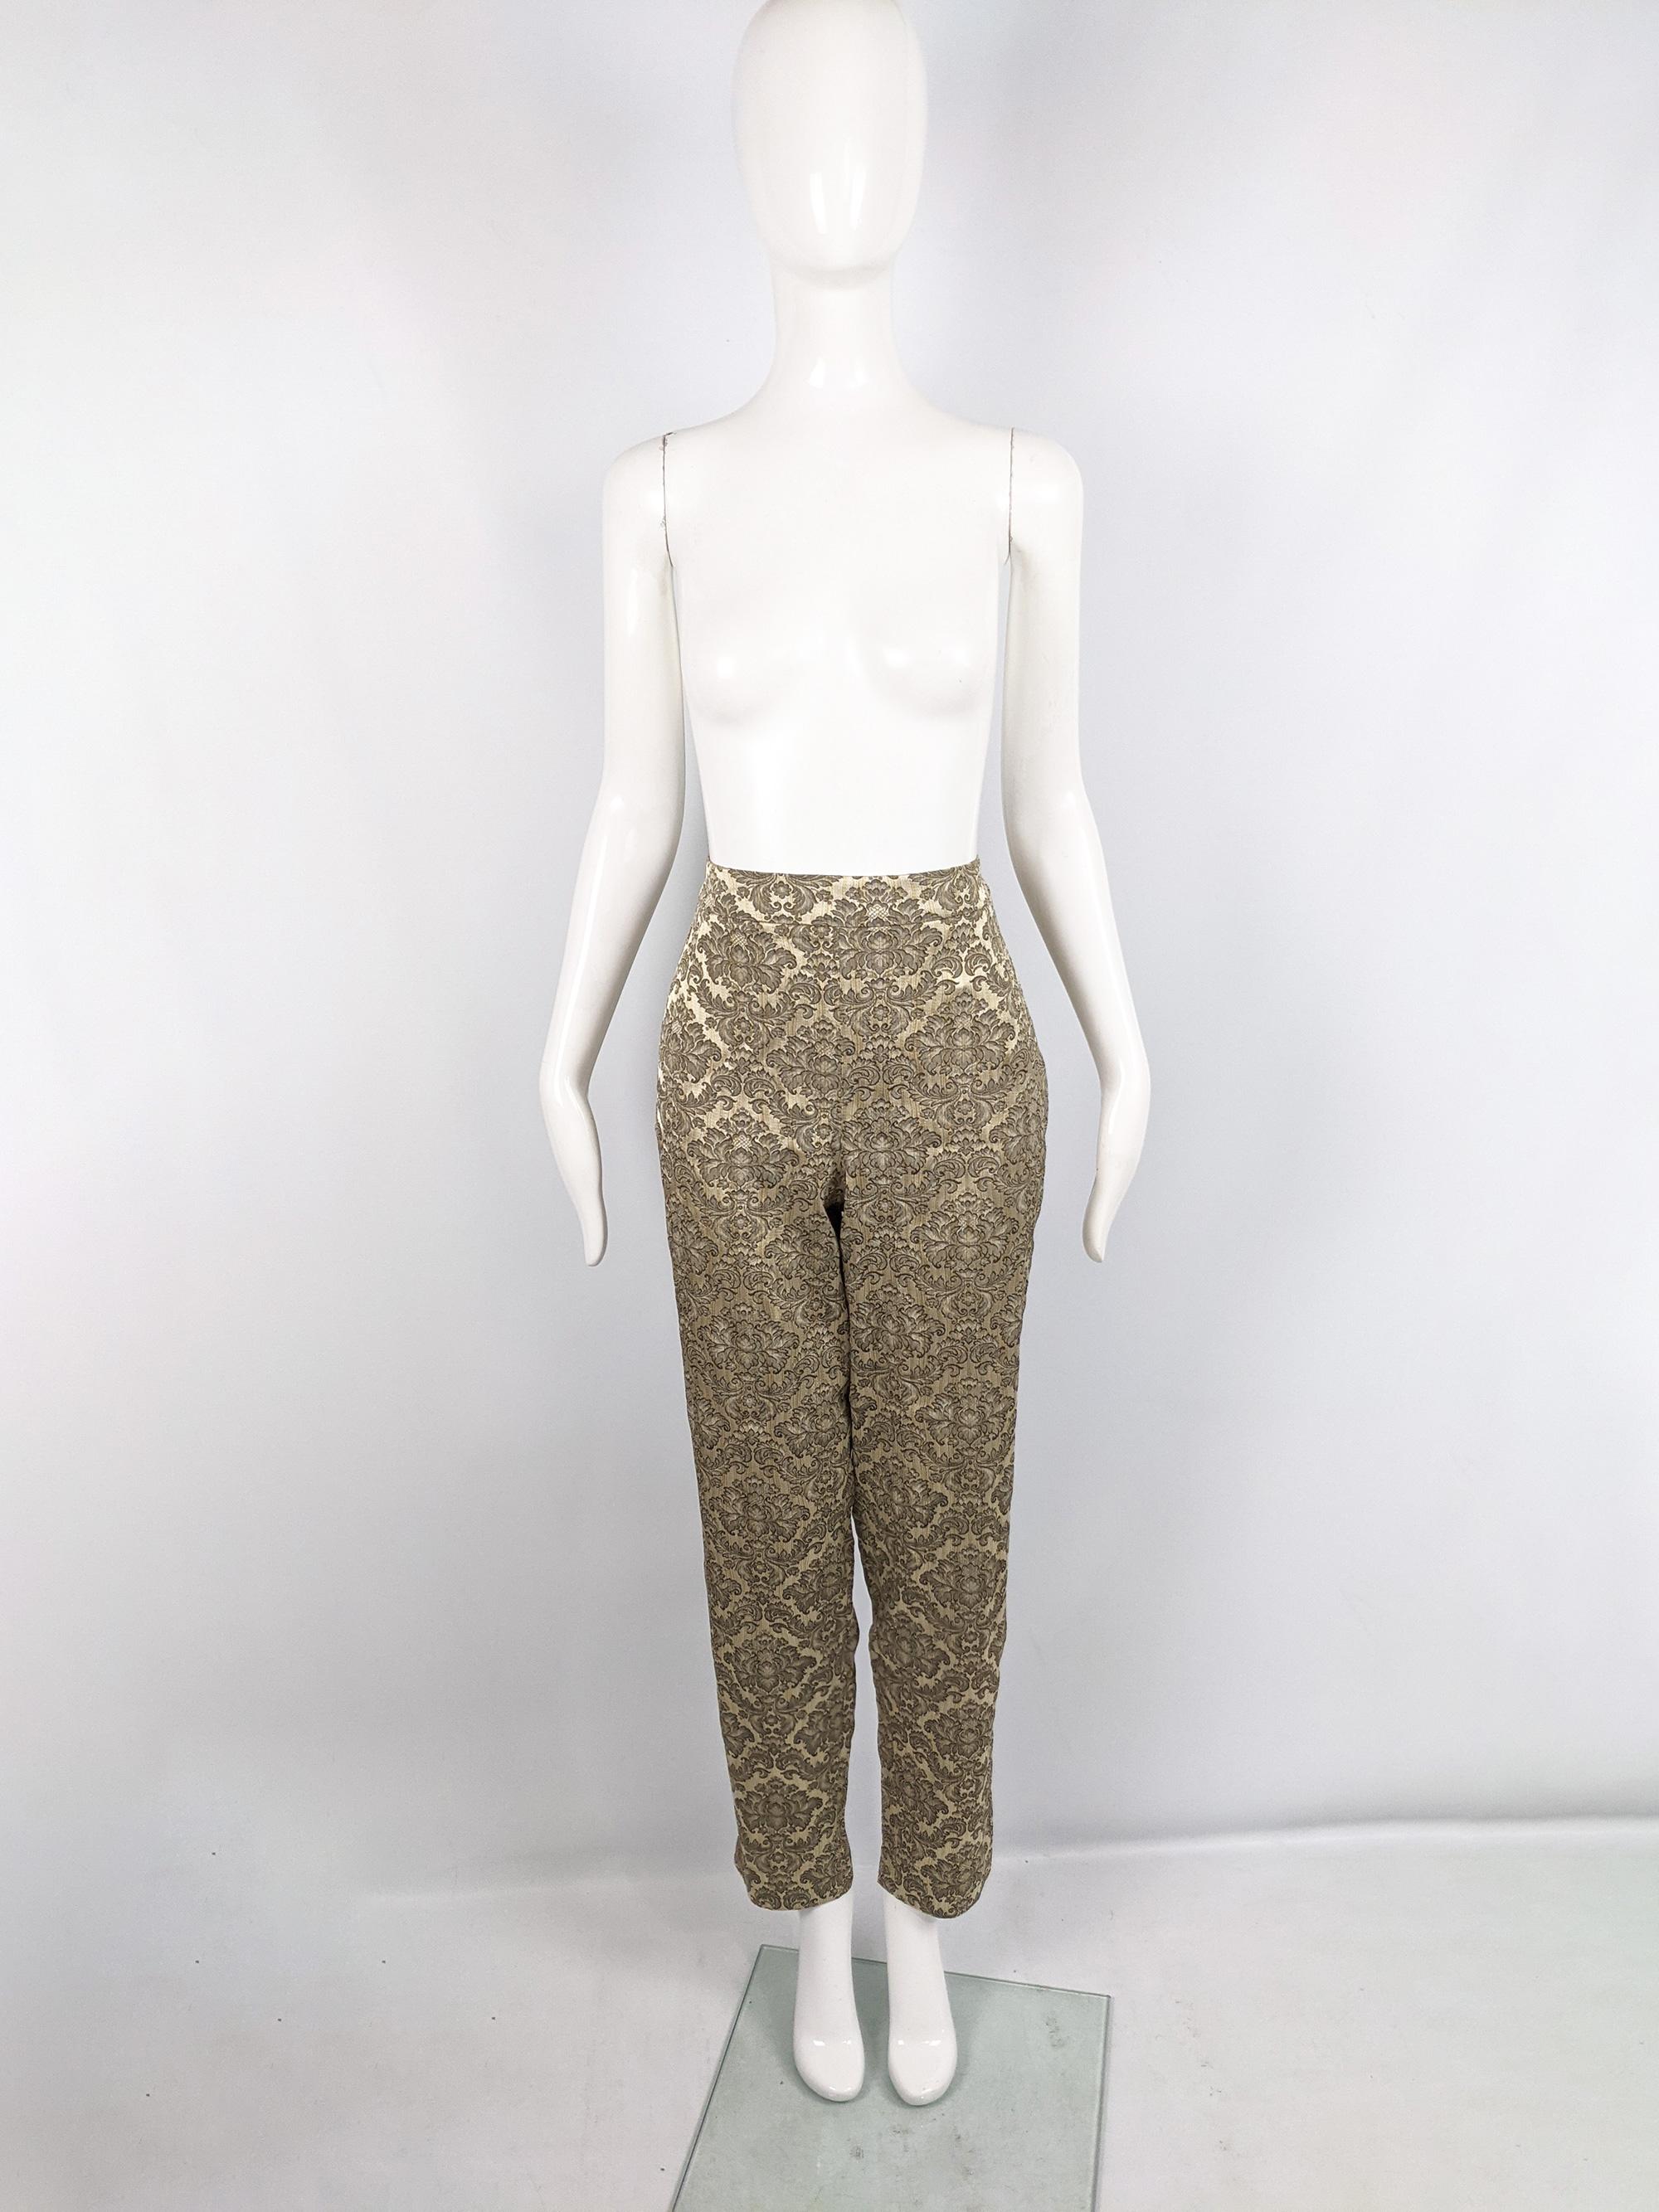 A chic pair of vintage cigarette pants from the 80s by luxury British department store, Harrods. In an opulent gold satin jacquard fabric with a damask pattern throughout and a high waist and tapered leg. Perfect for a party. 

Size: Marked vintage